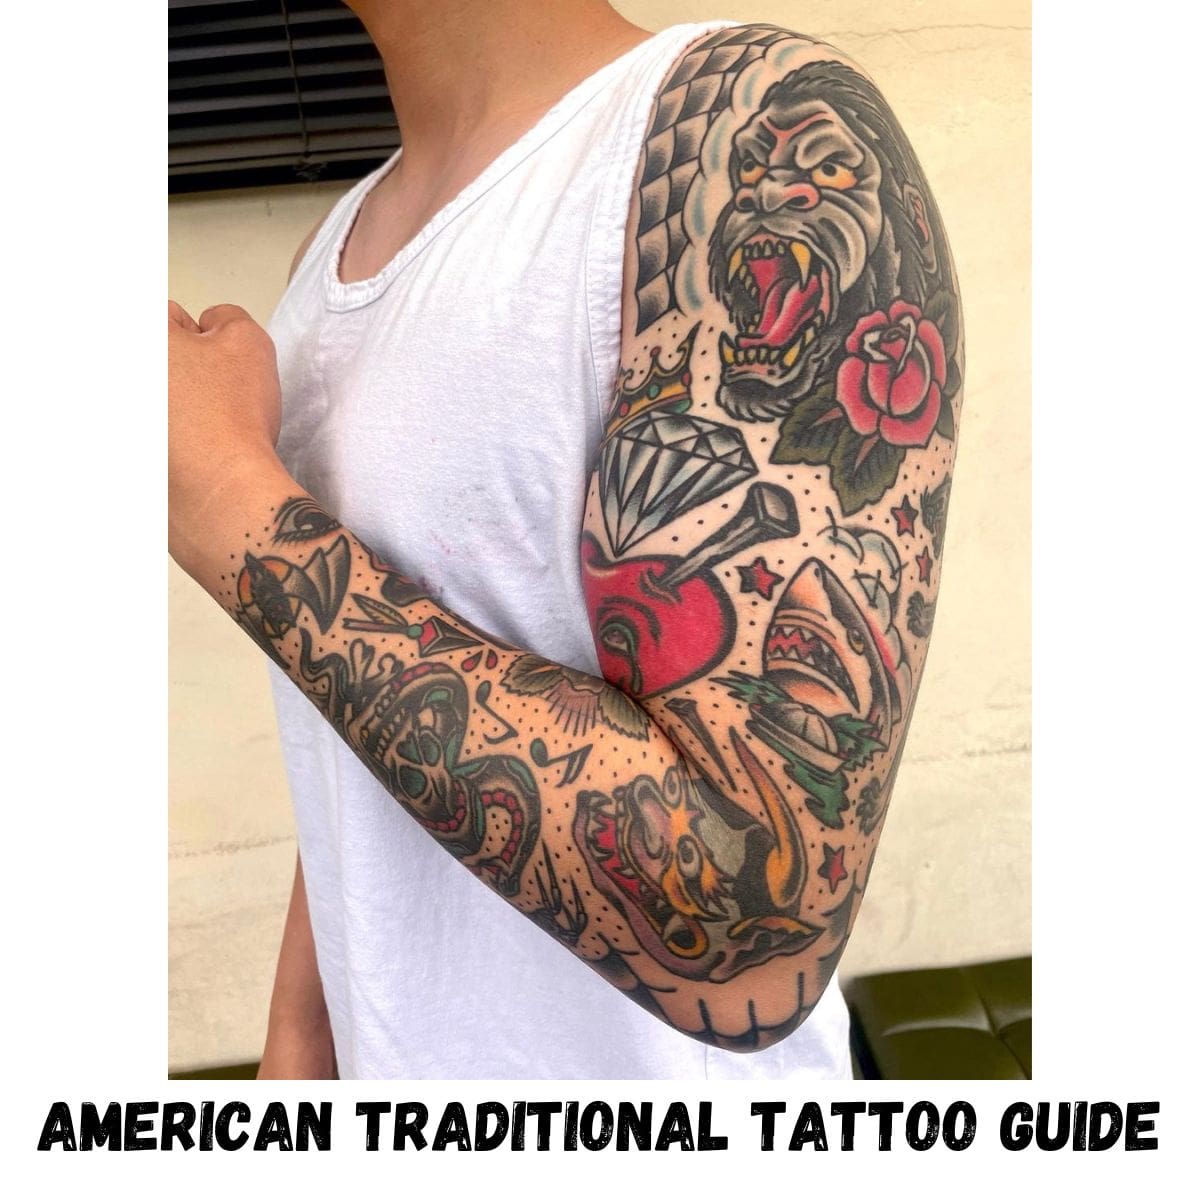 American Traditional Tattoo Guide +100 designs